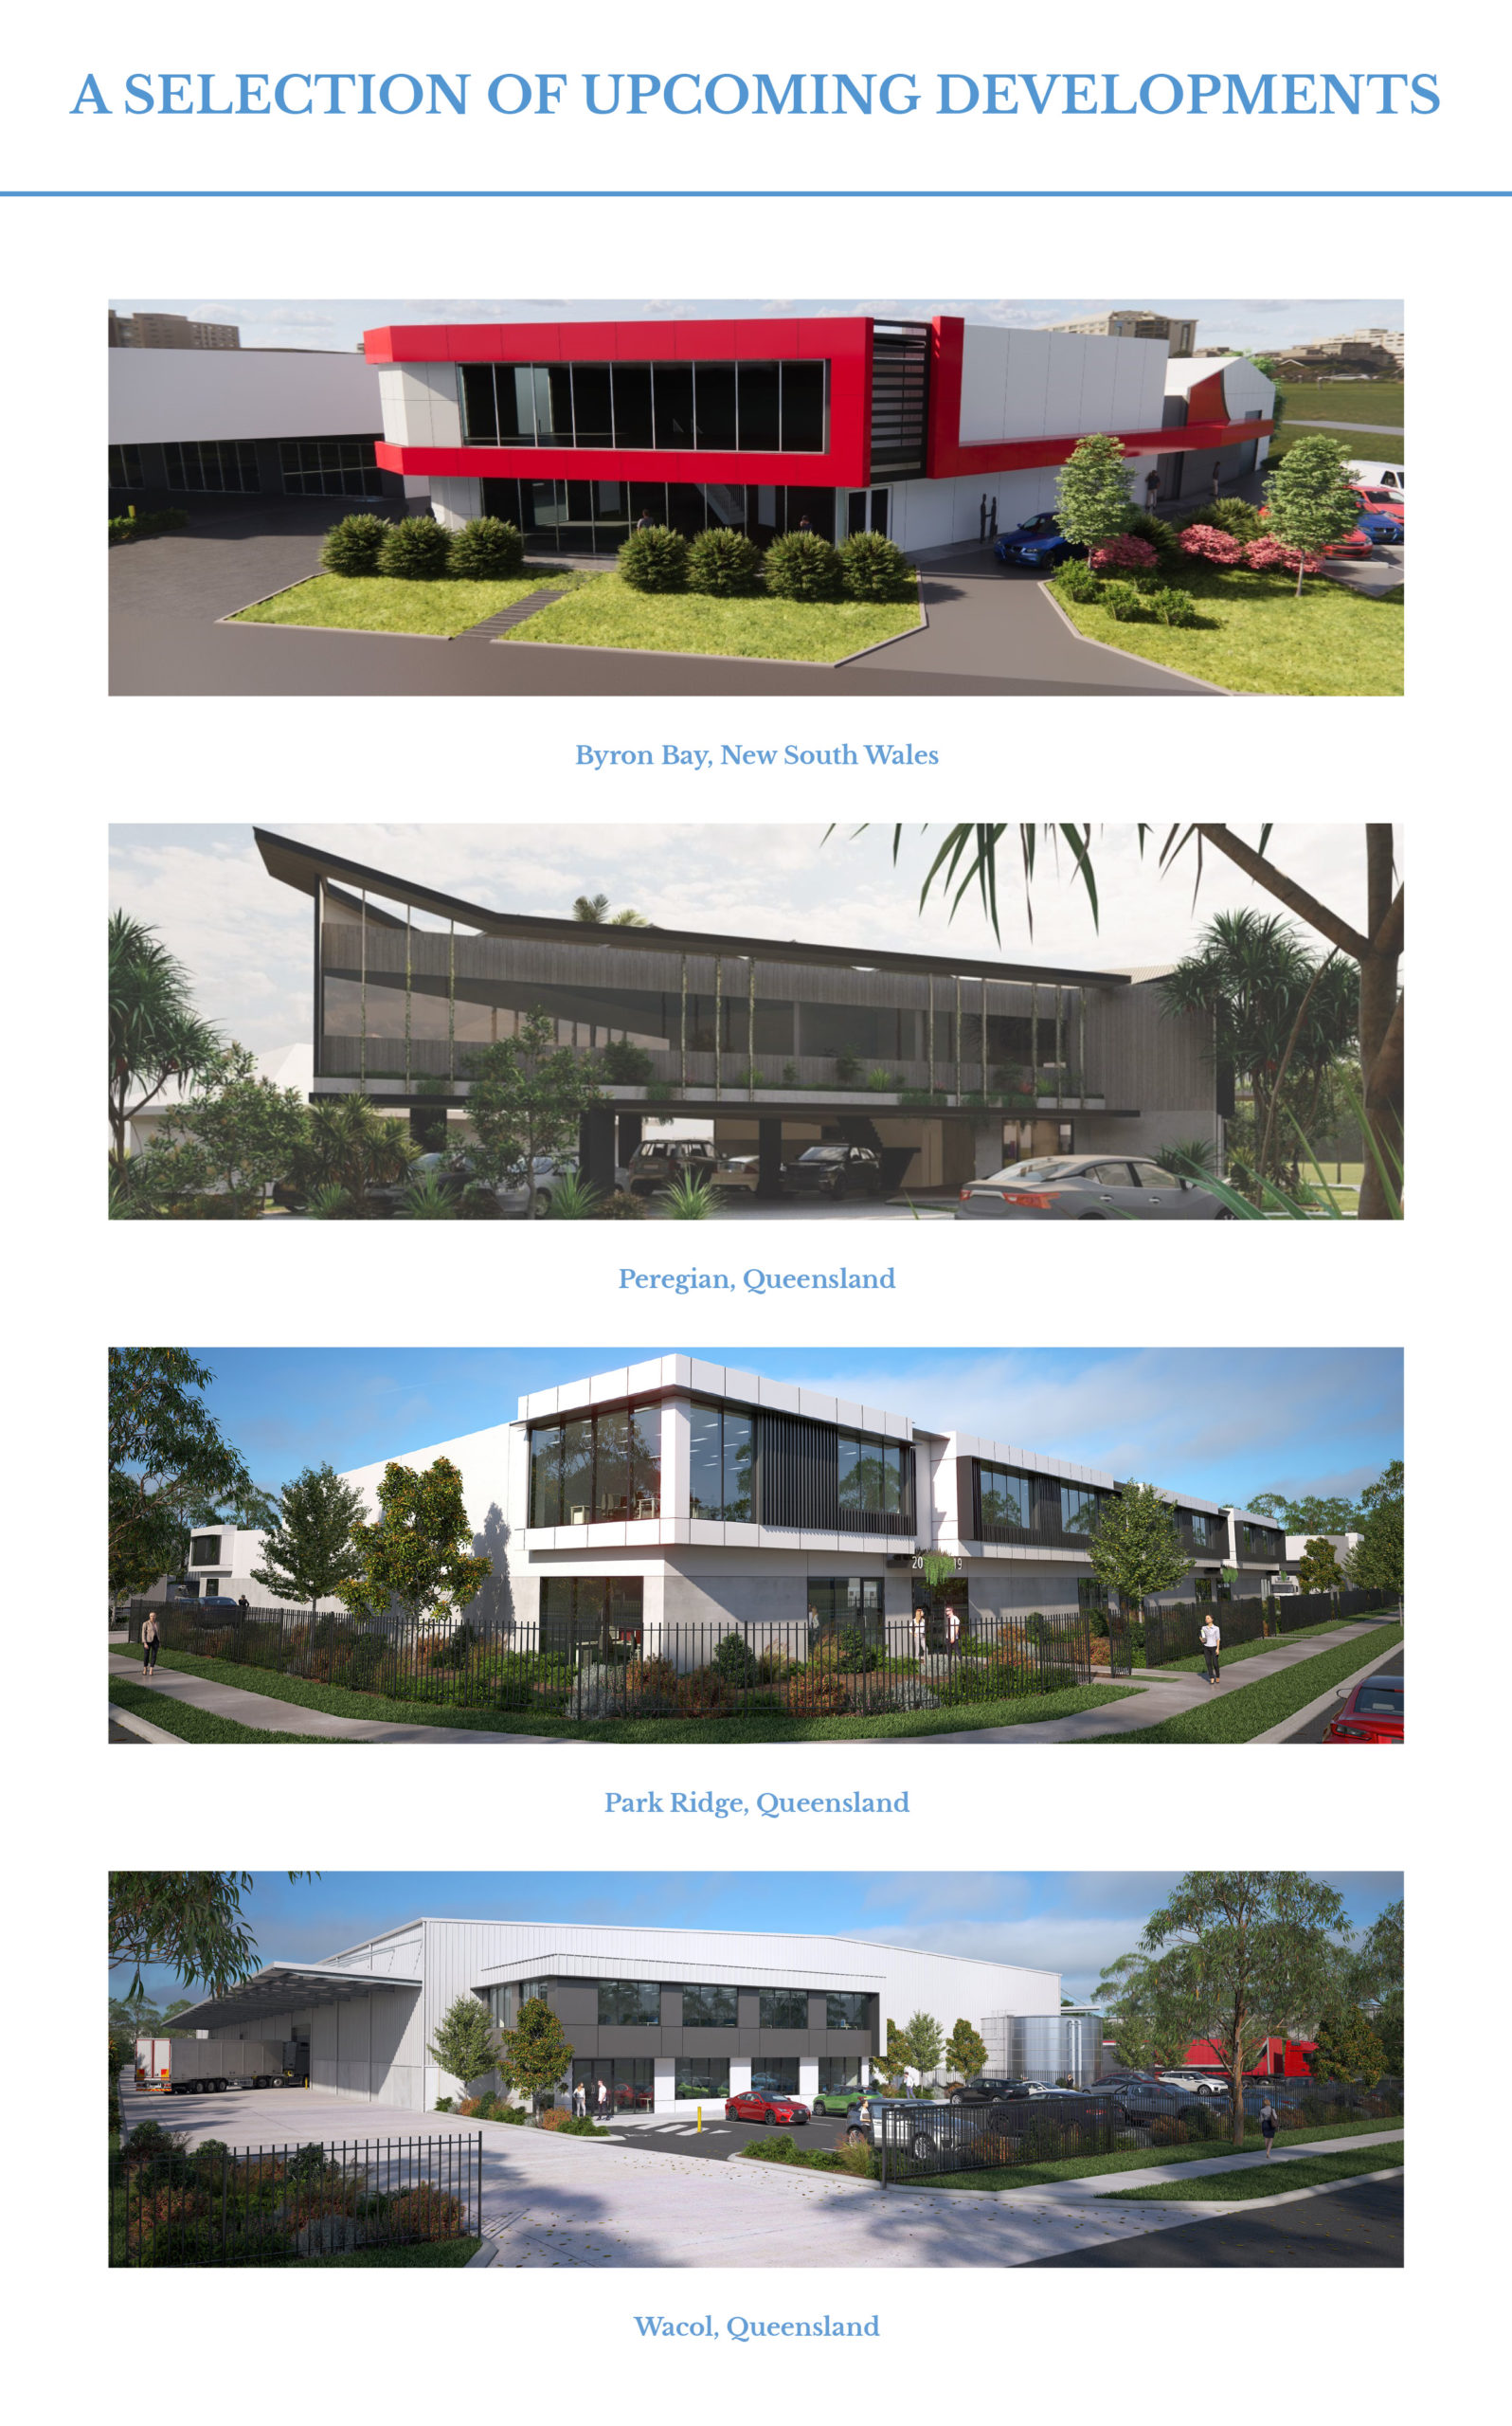 A SELECTION OF UPCOMING DEVELOPMENTS Byron Bay, New South Wales Peregian, Queensland Park Ridge, Queensland Wacol, Queensland